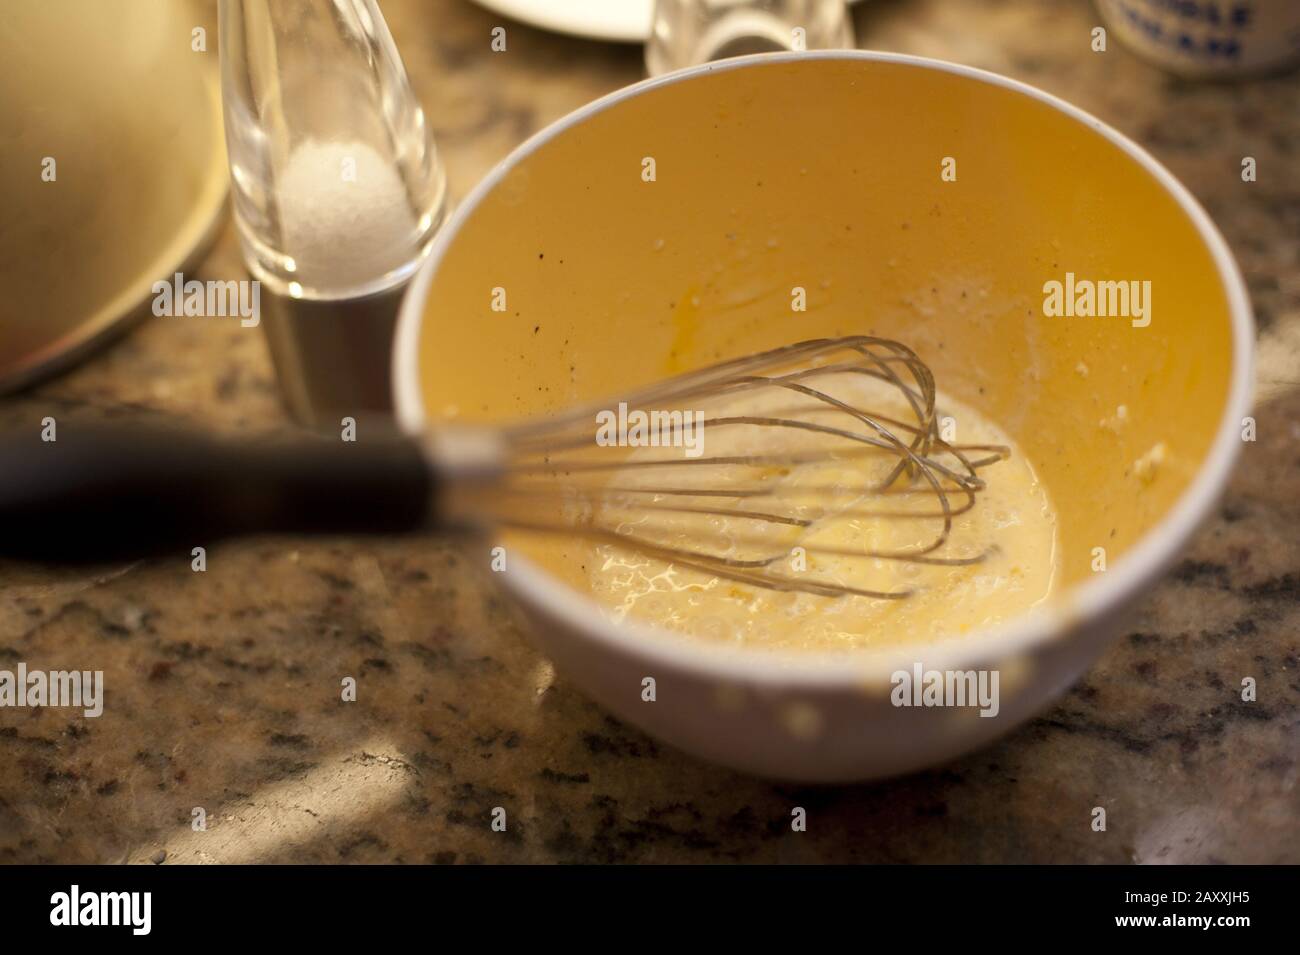 https://c8.alamy.com/comp/2AXXJH5/metal-whisk-in-a-mixing-bowl-with-whisked-egg-on-a-kitchen-table-reading-for-baking-2AXXJH5.jpg